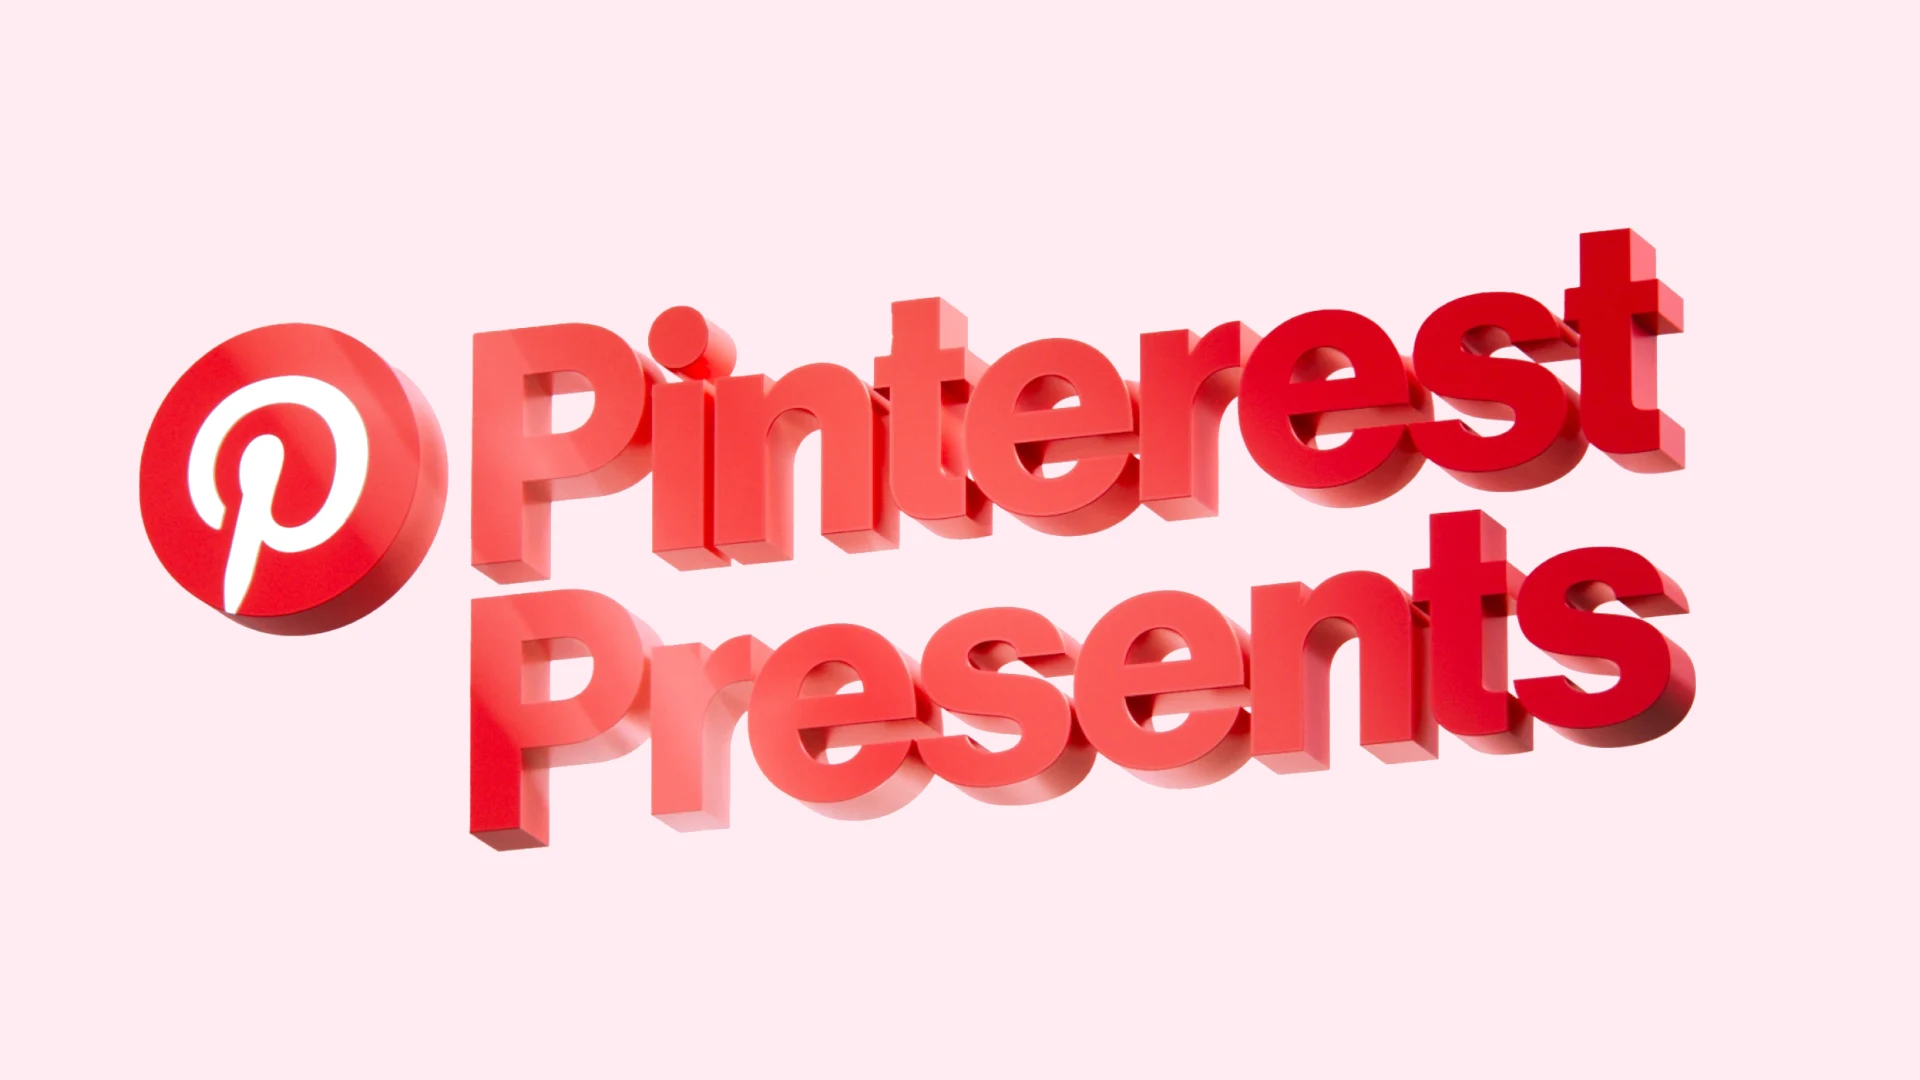 Introducing Pinterest TV, a fresh dose of live, original and